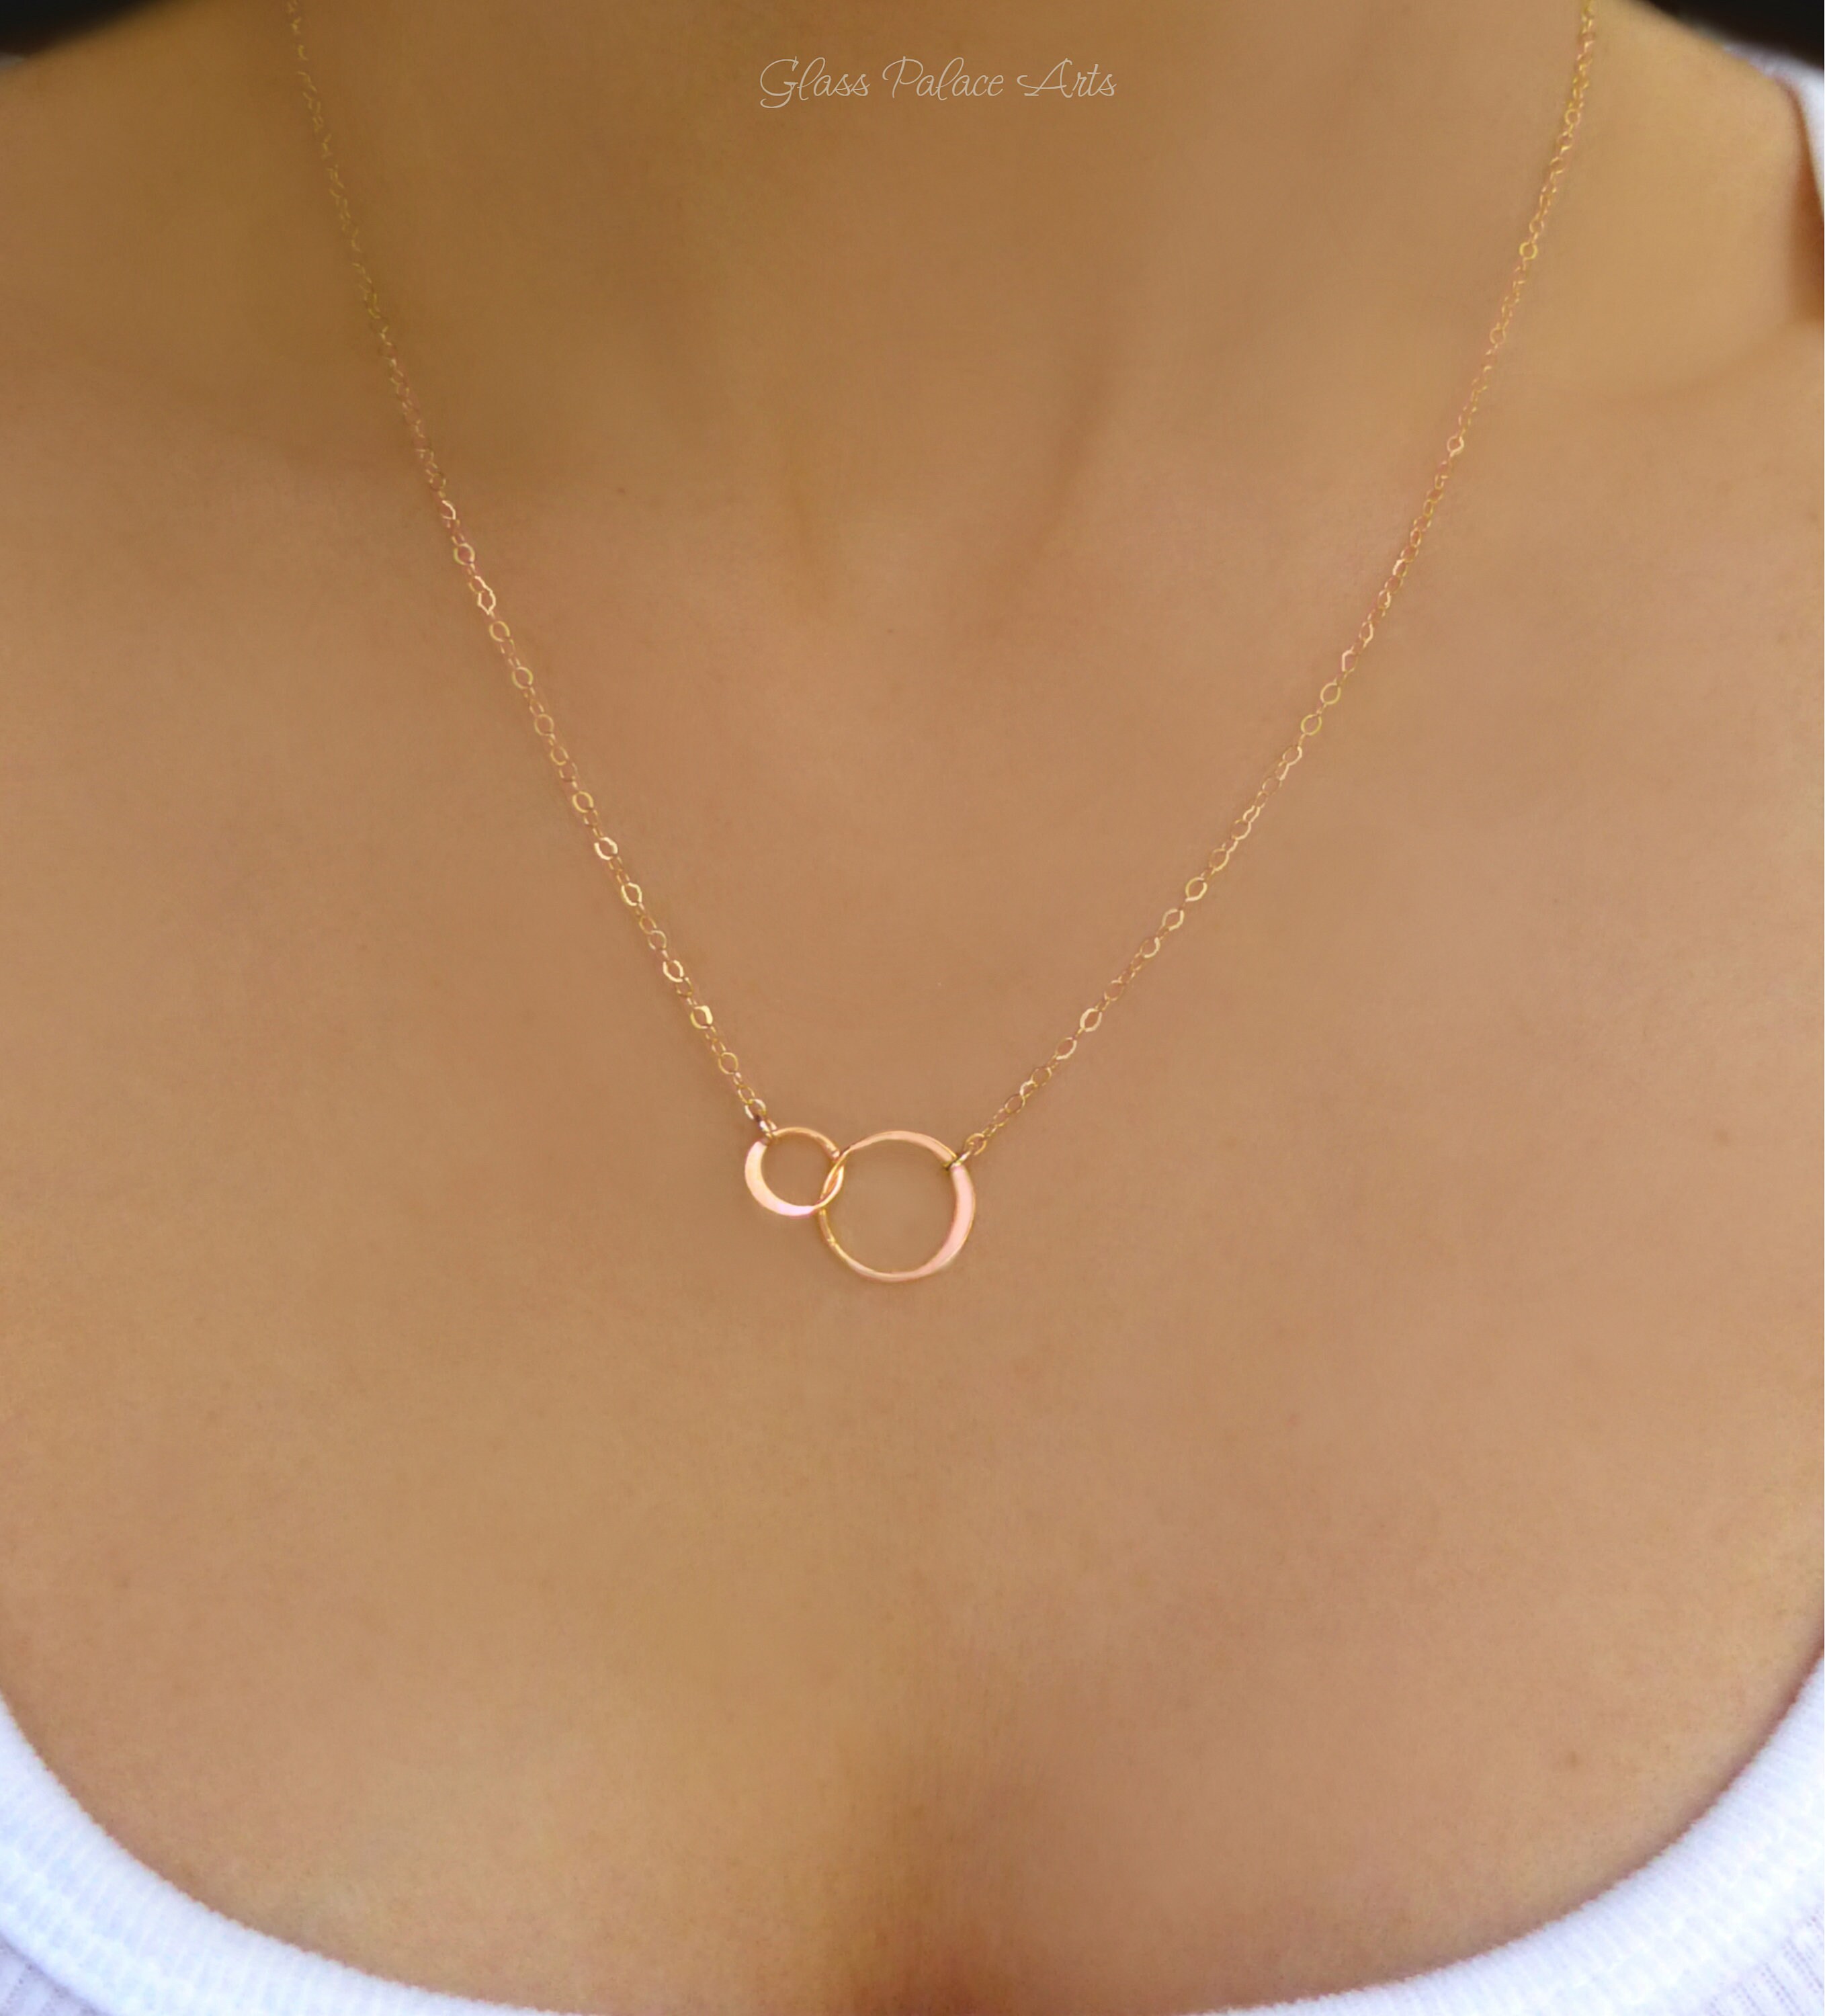 Buy Simple Gold Chain, Circle, Ring, Short, Gold-plated, Rose Gold or  Rhodium-plated Brass. Minimalist and Delicate Online in India - Etsy